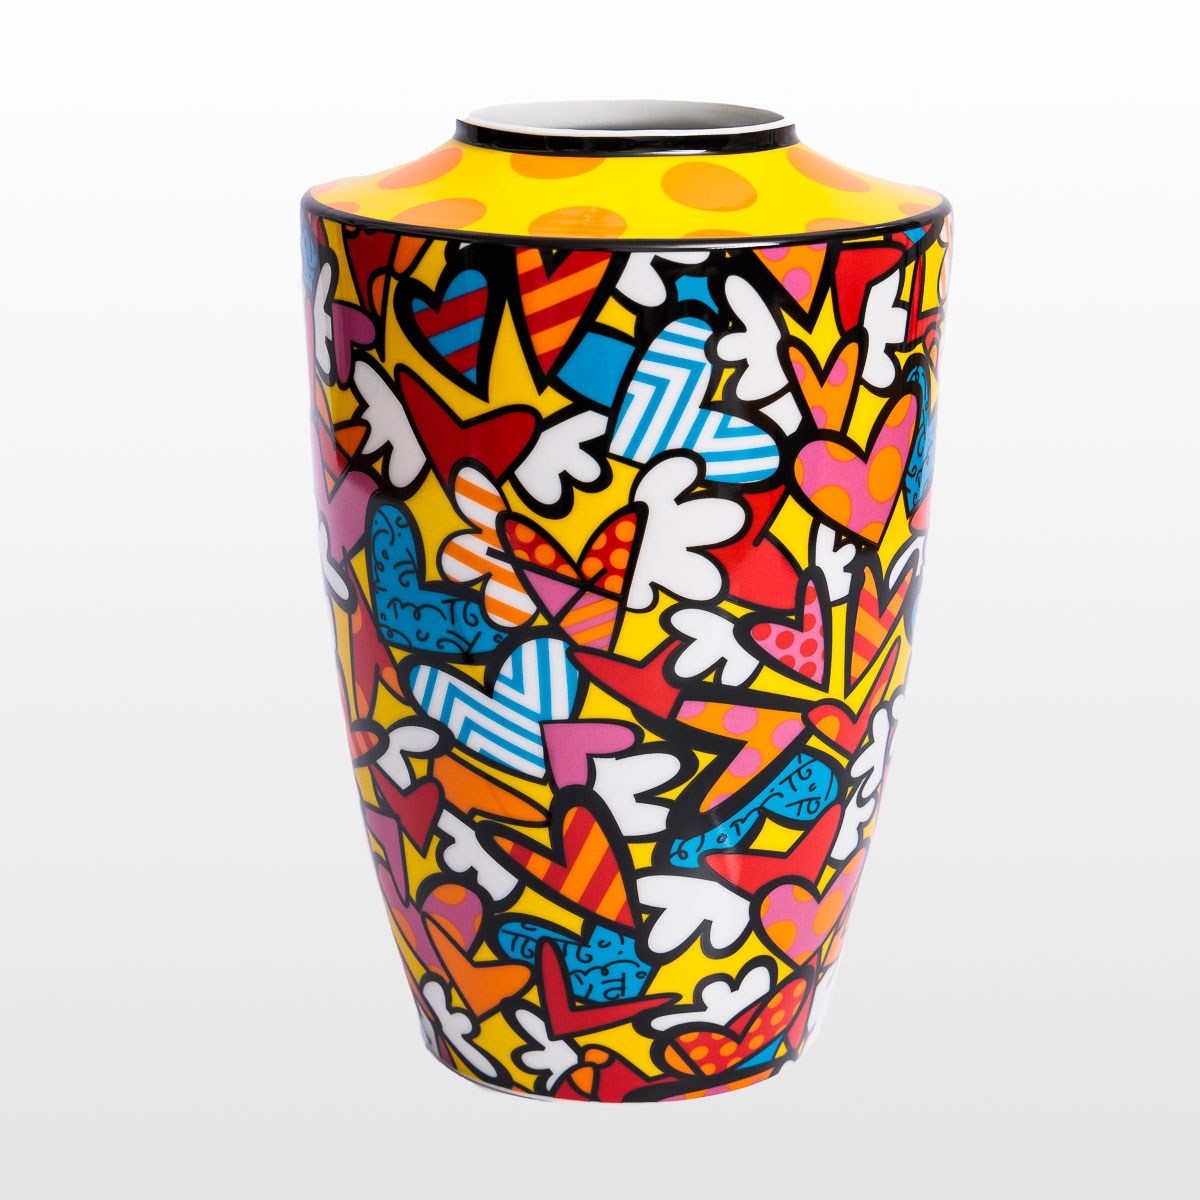 Romero Britto vase : All we need is love (detail 2)